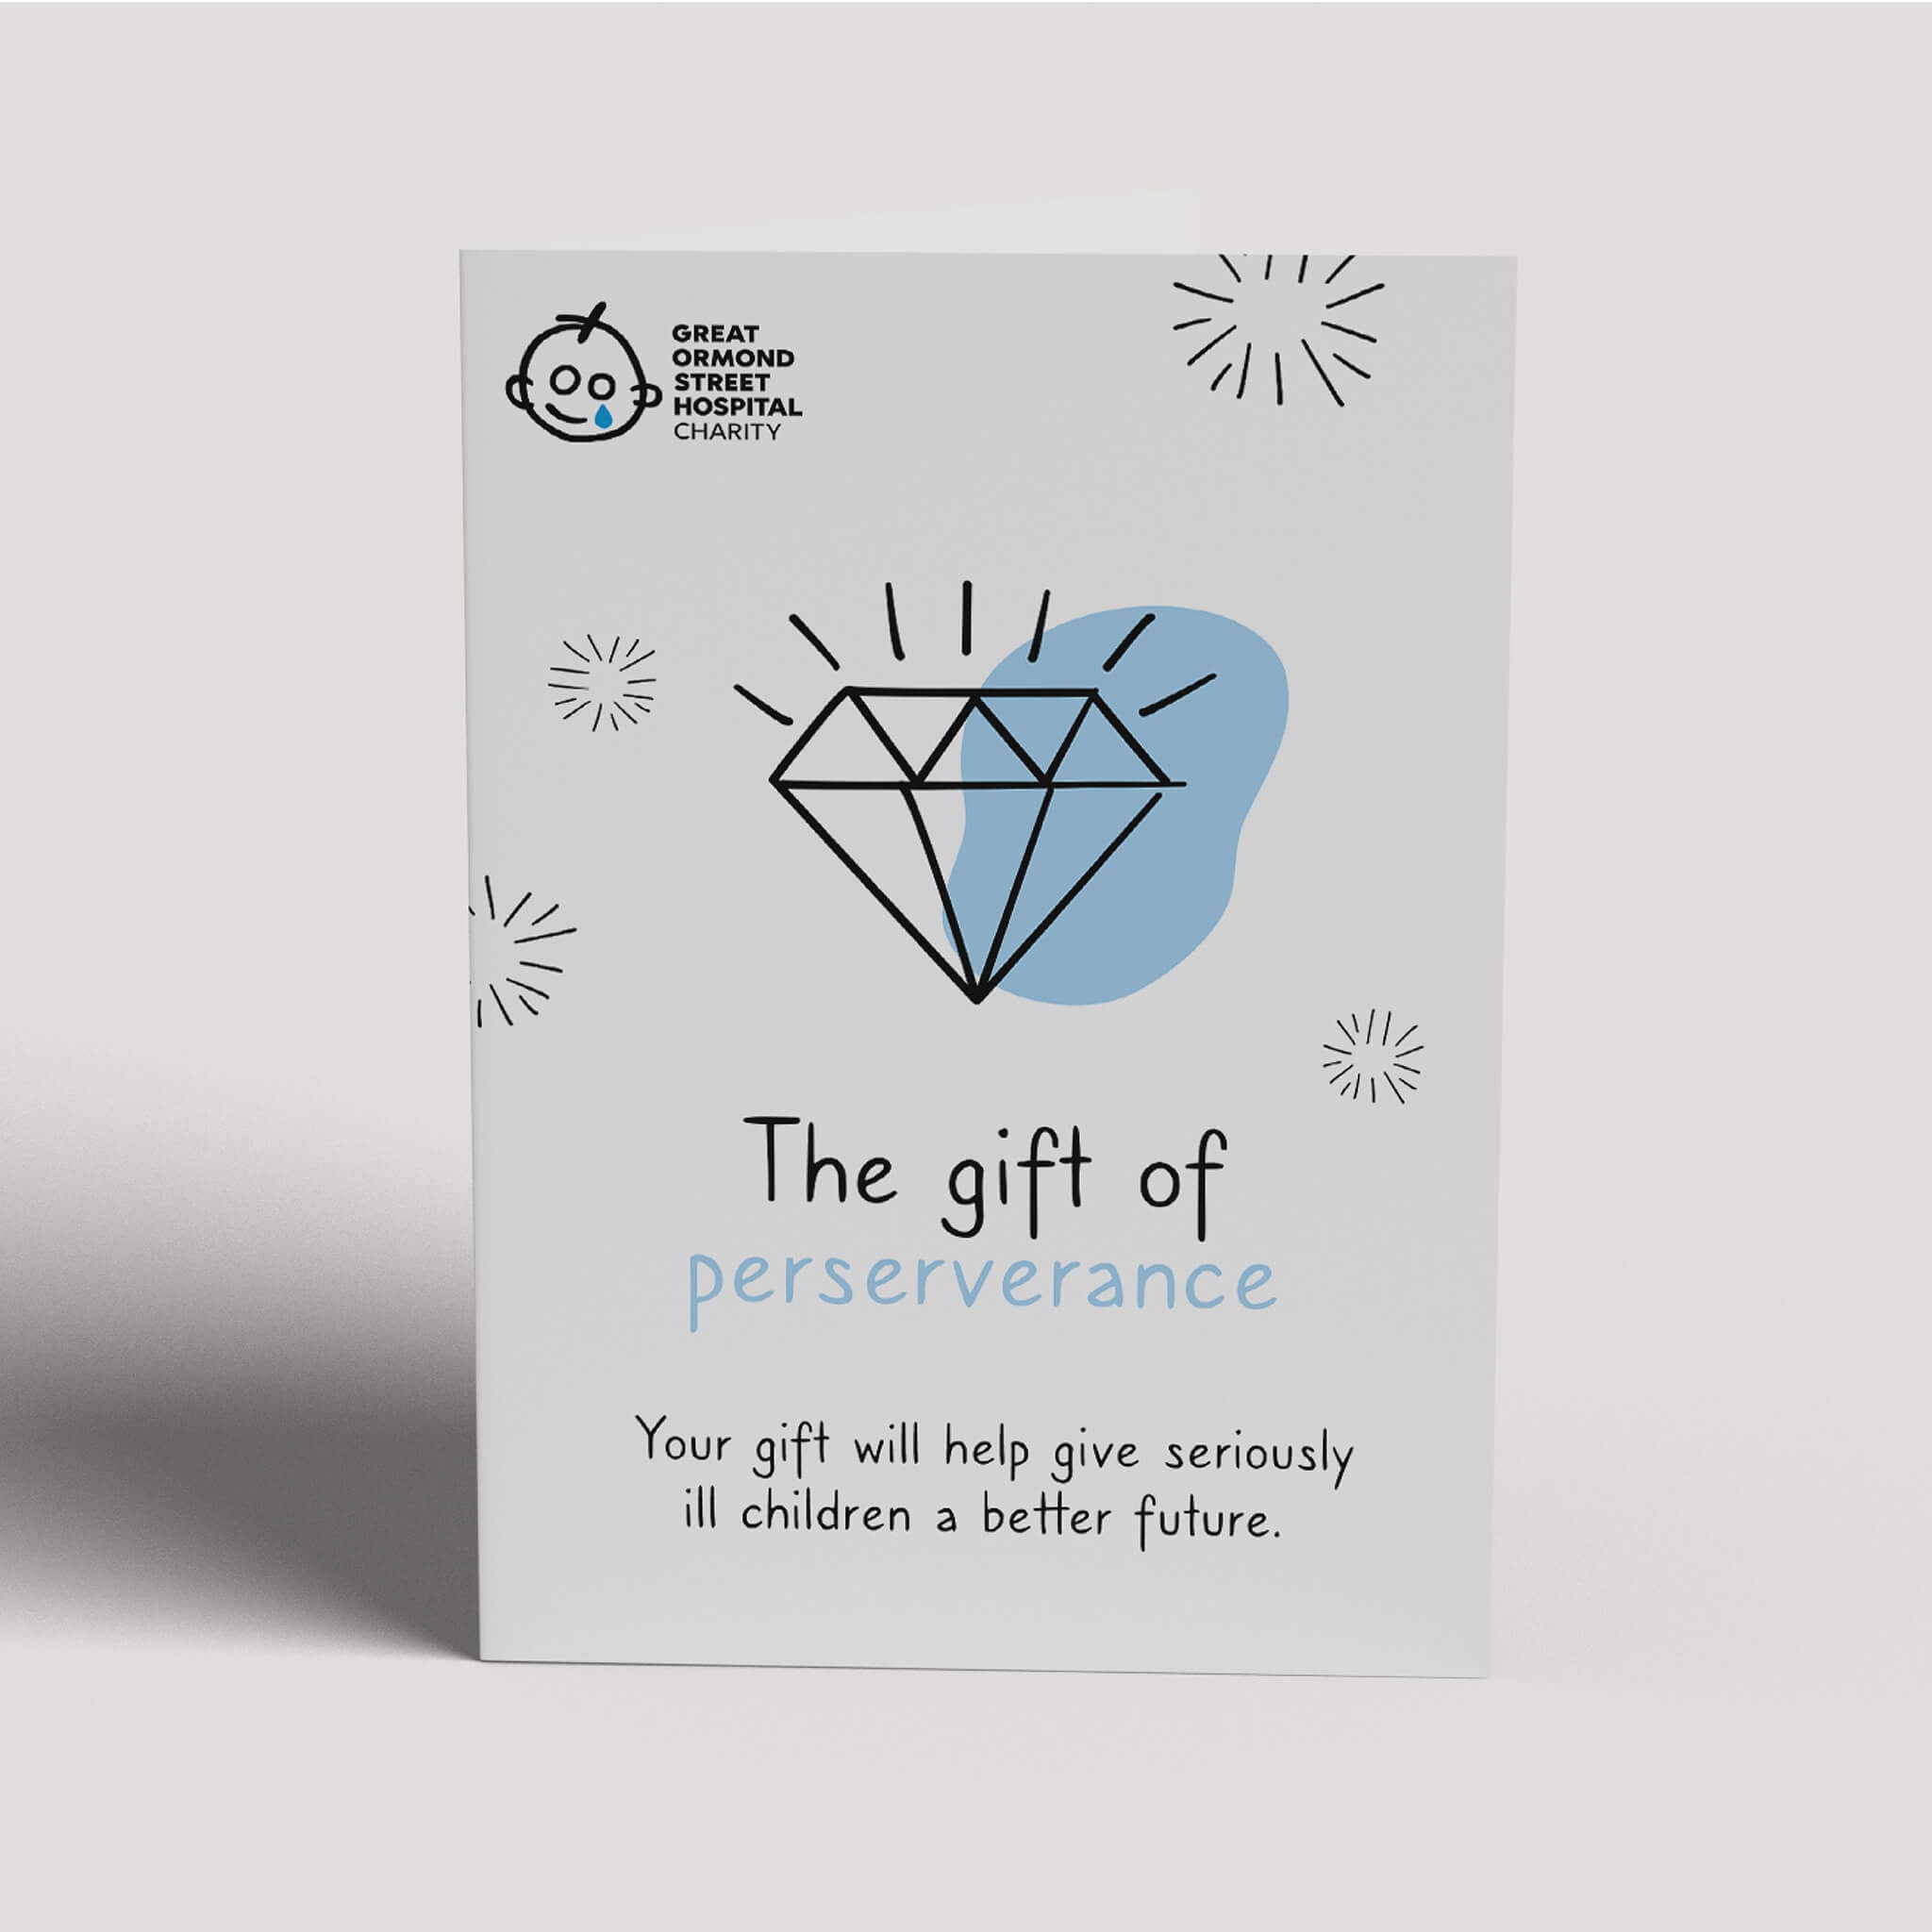 GOSH_Charity_alternative_gift_card_for_medical_research_donations